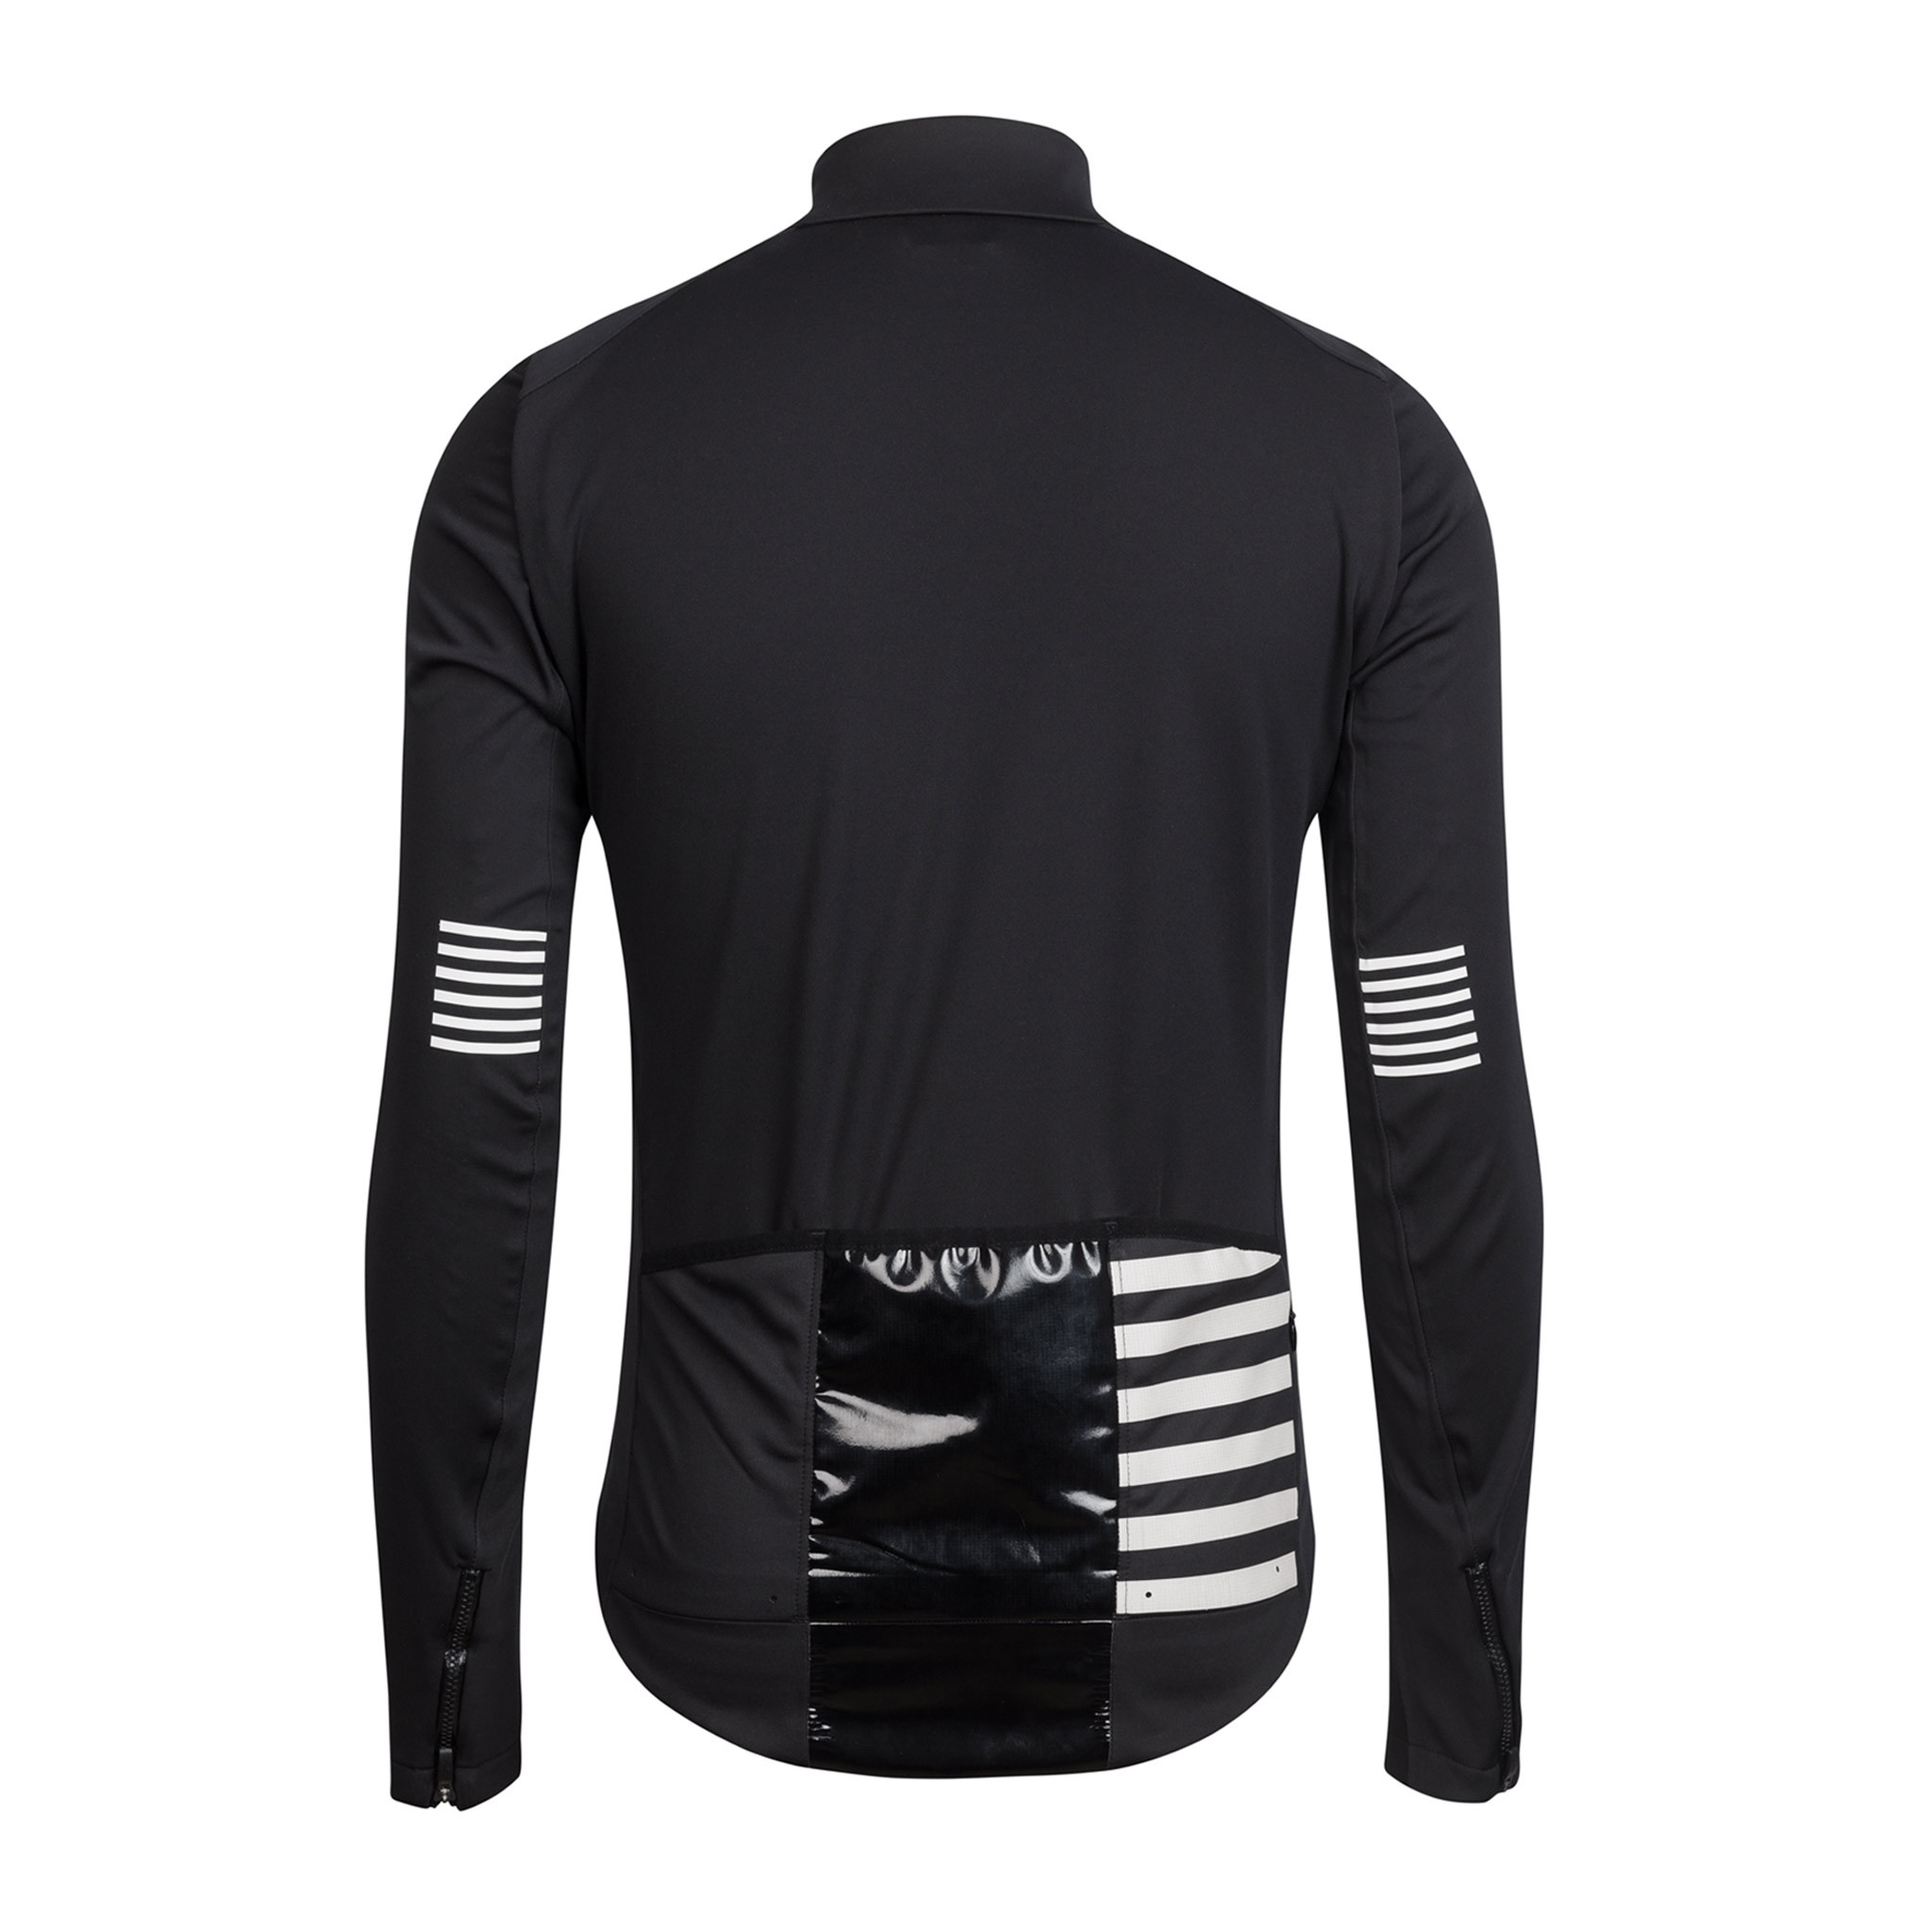 Rapha motivates to ride into winter with updated Pro Team Softshell   Braver Than the Elements rides - Bikerumor